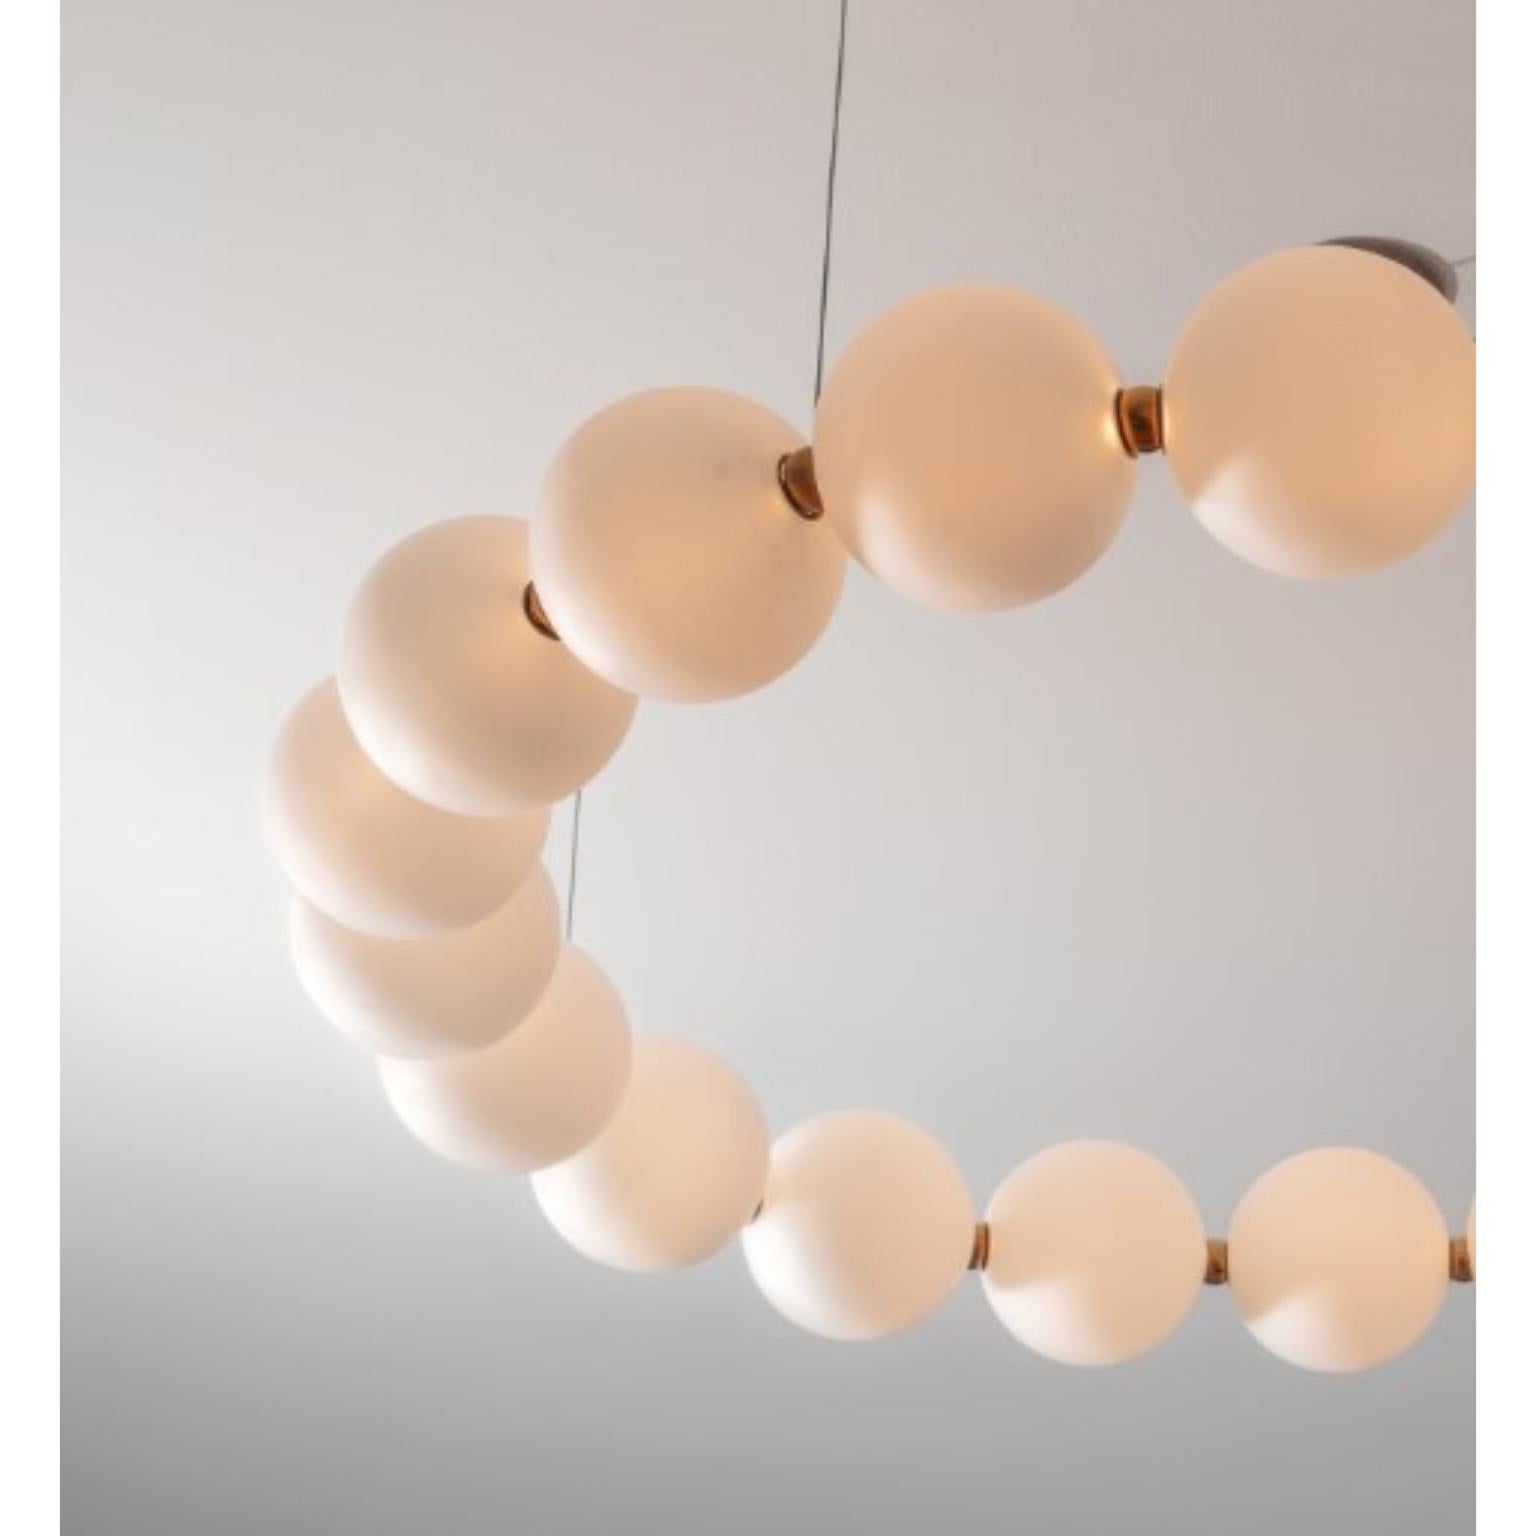 Mouth blown glass pearls round by Ludovic Clément d'Armont
Dimensions: D 90 x H 12 cm
Materials: blown glass, Brass joints, warm white LEDs

The Pearl line is a simple architectural element that helps structure a space. 
Depending on the shape you